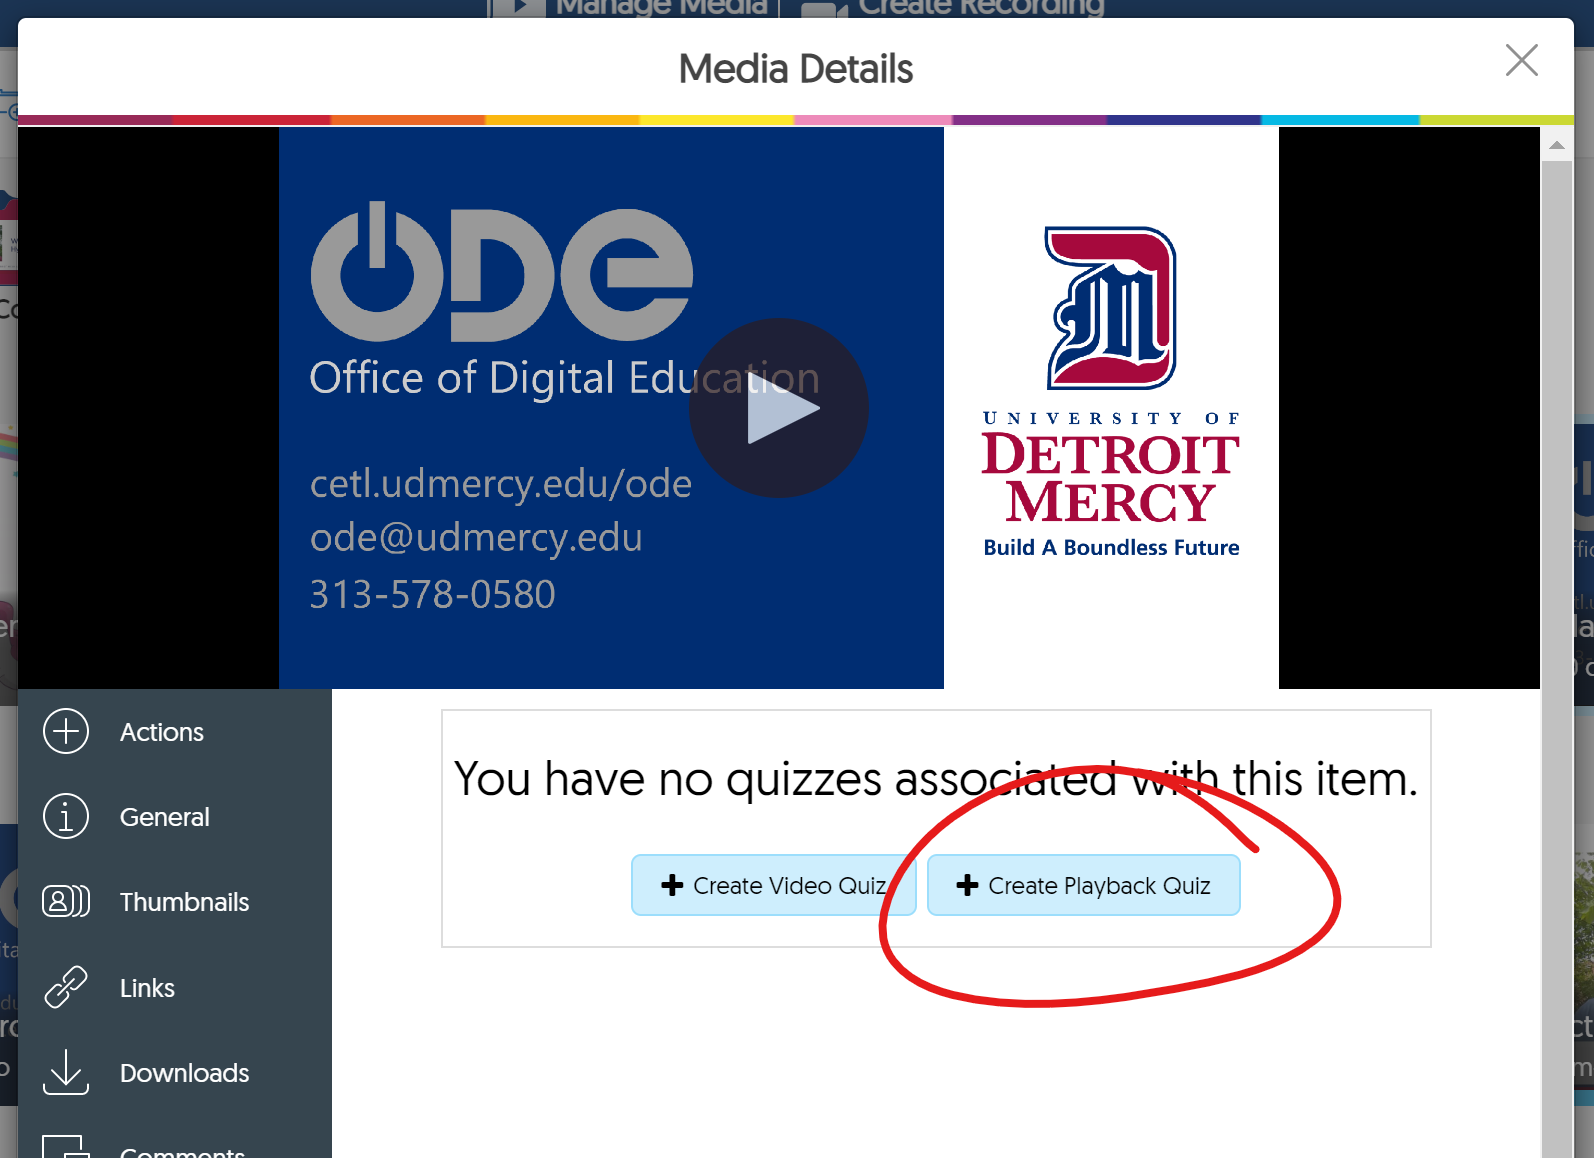 Quizzes page, create playback quiz button highlighted